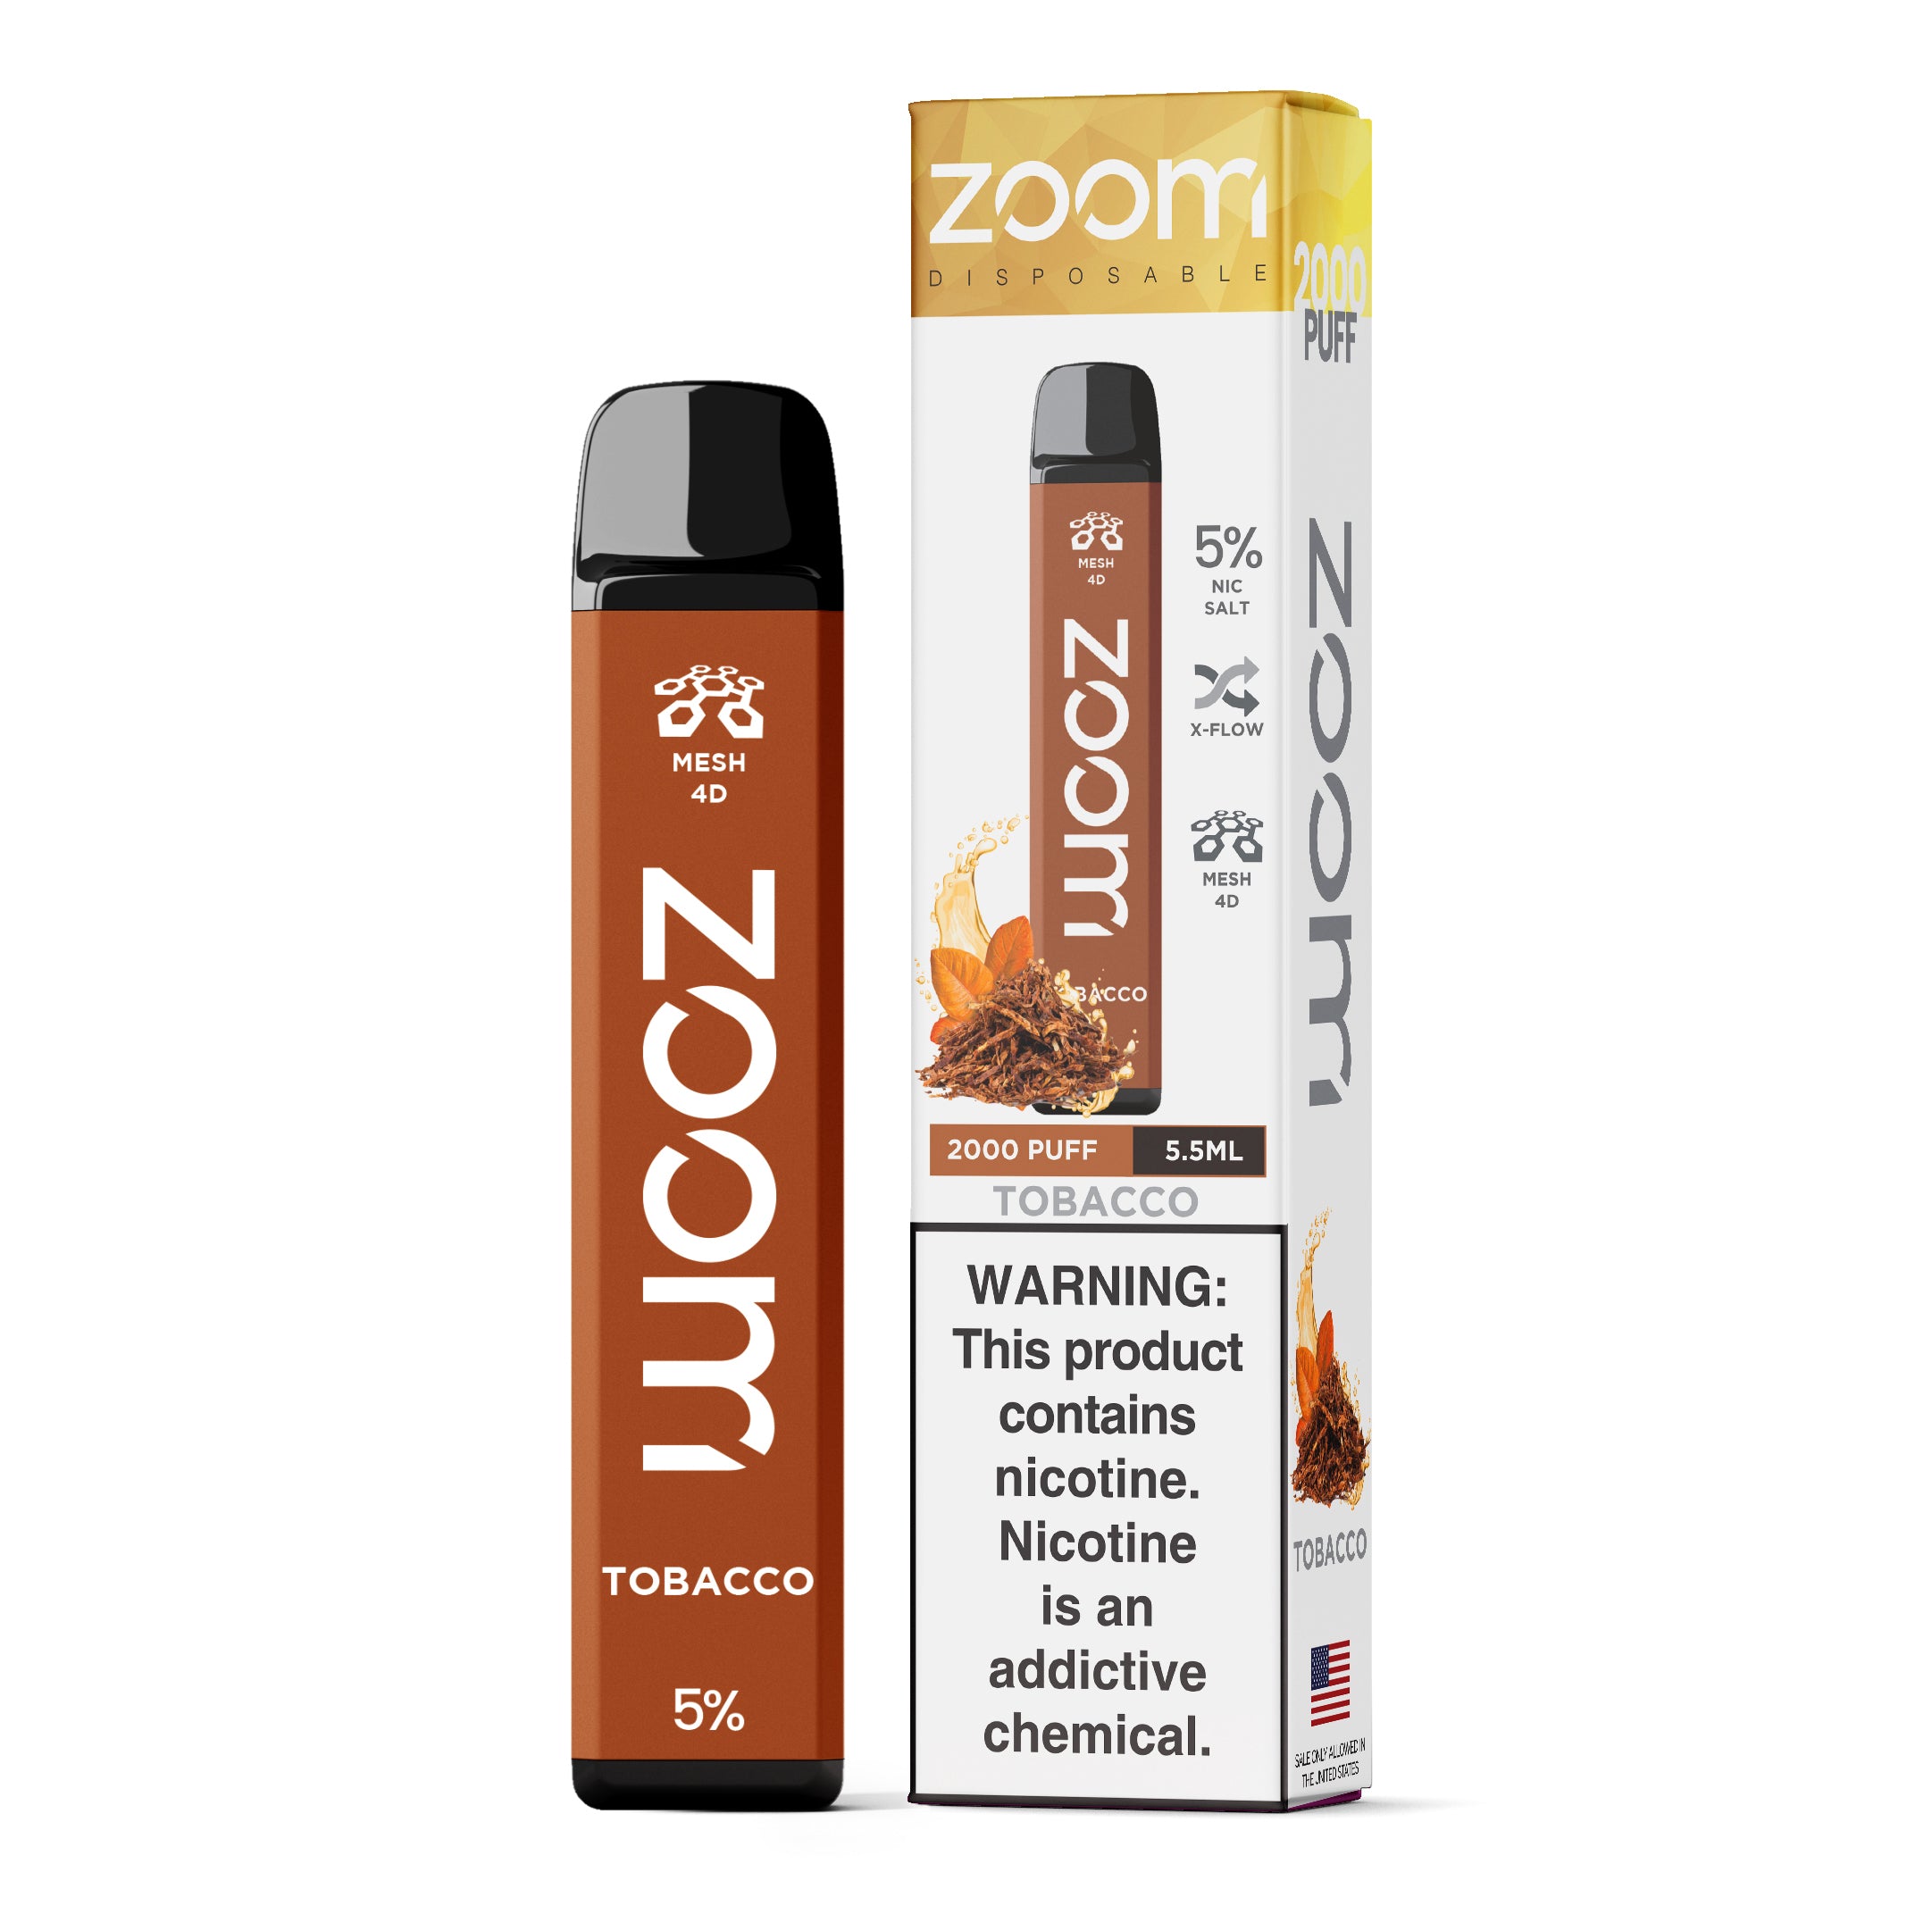 Zoom Disposable | 2000 Puffs | 5.5mL Tobacco with packaging